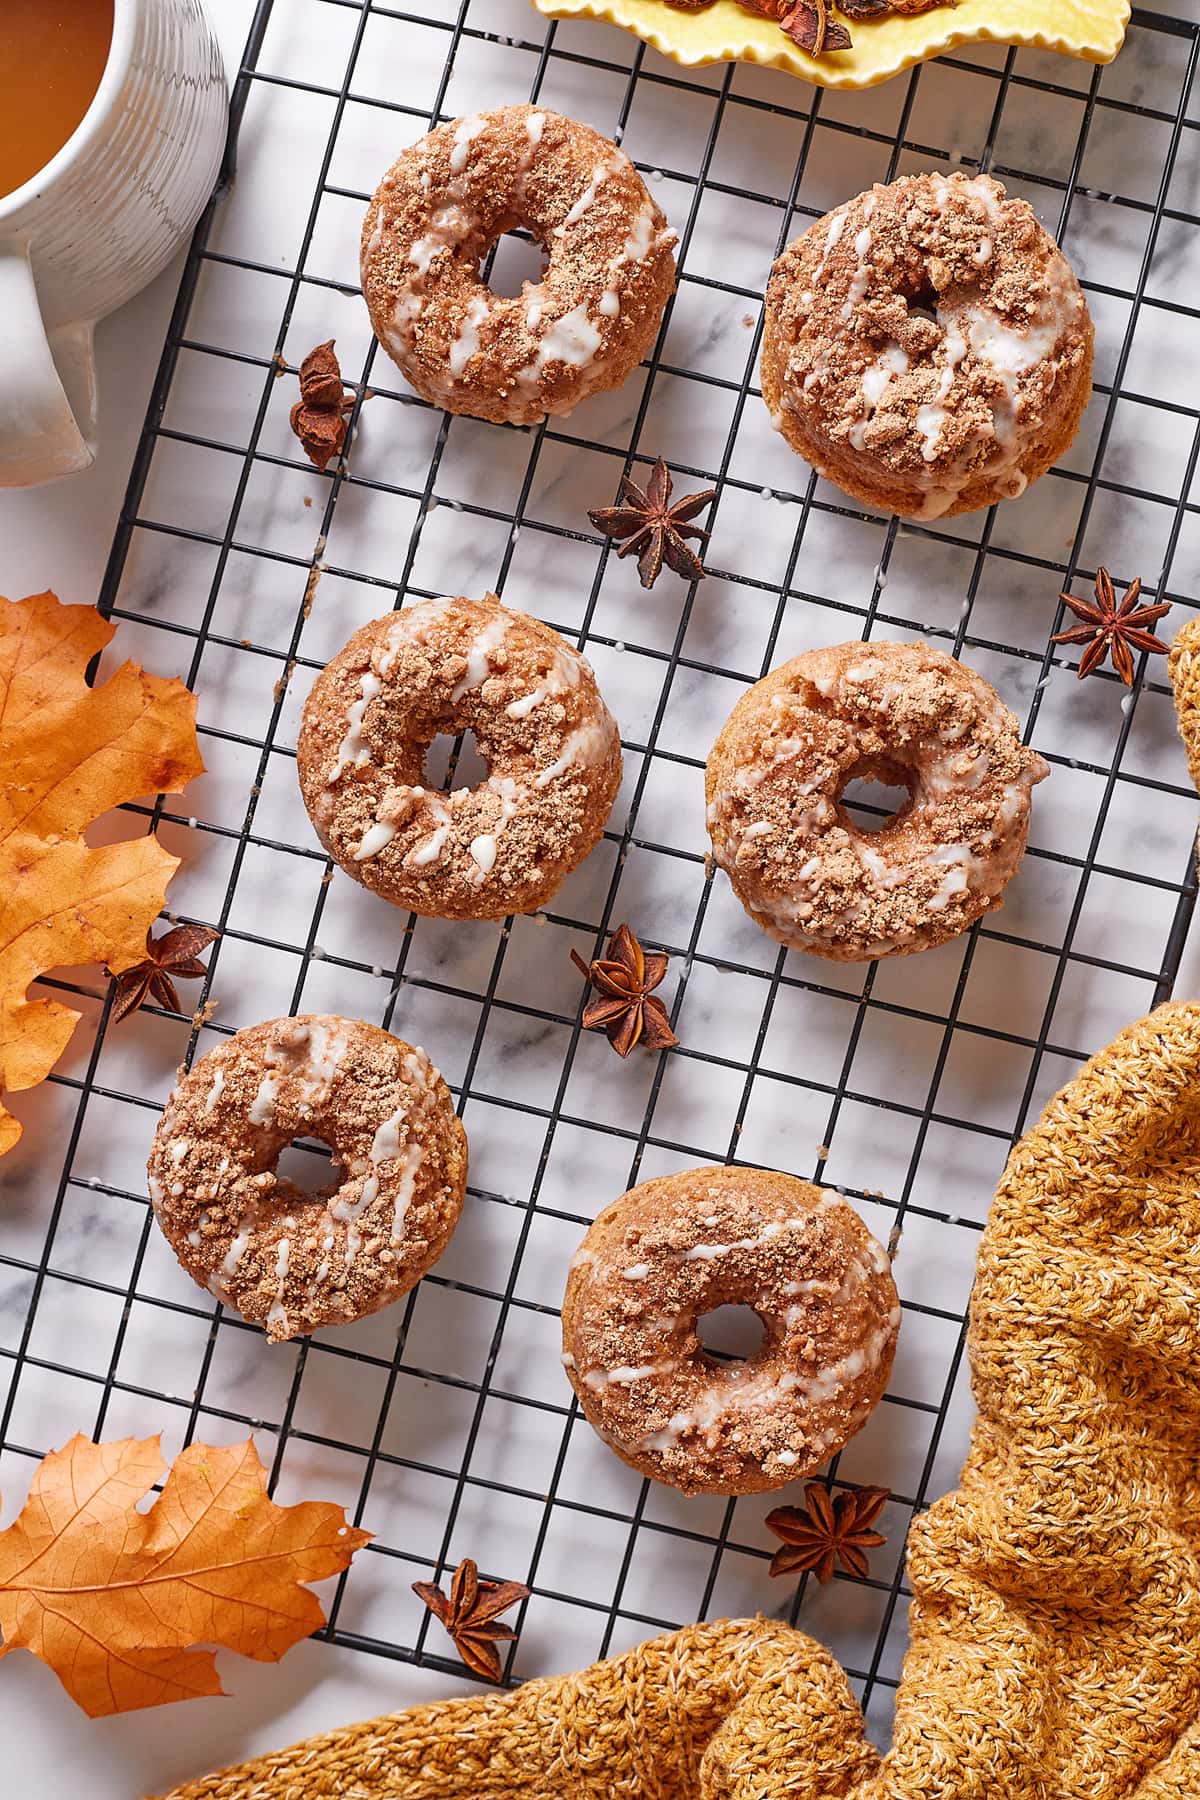 Six crumble topped baked cinnamon donuts on a fall inspired background.